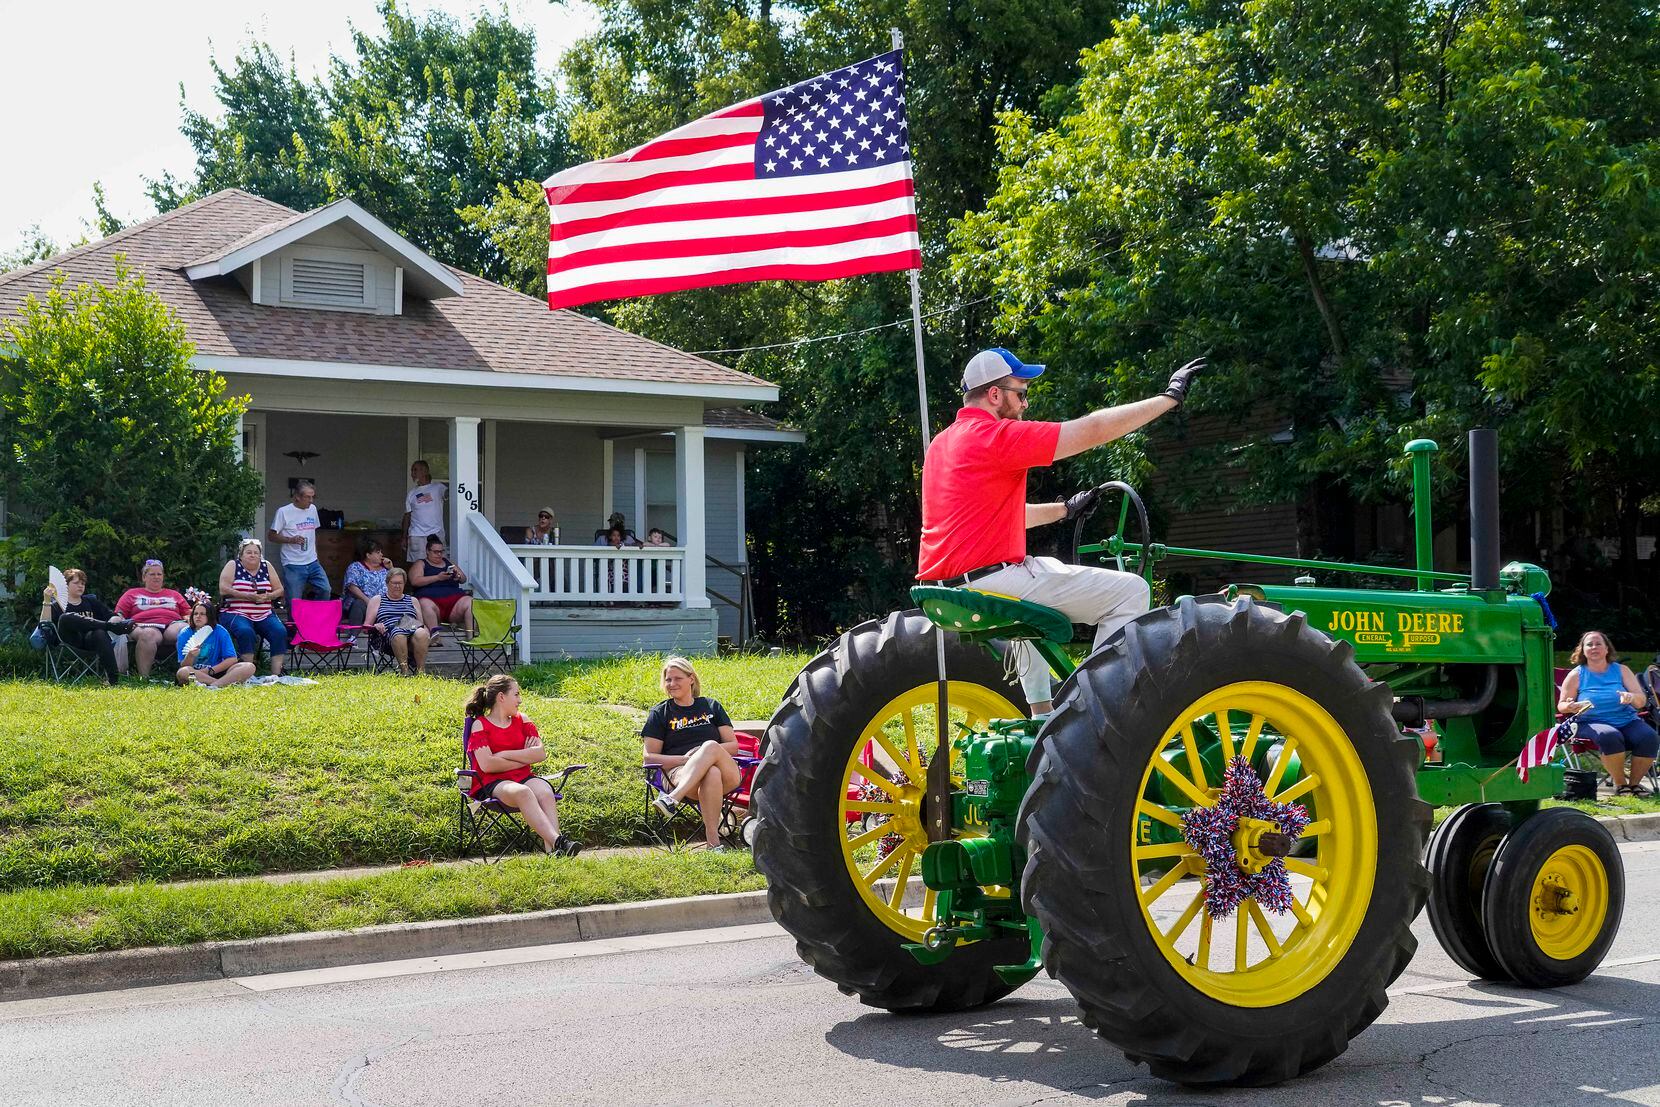 A man riding tall on a John Deere tractor waved to residents along the route of the Arlington Independence Day Parade on July 5. The parade, the city’s longest running event, had been canceled in 2020 due to the pandemic.